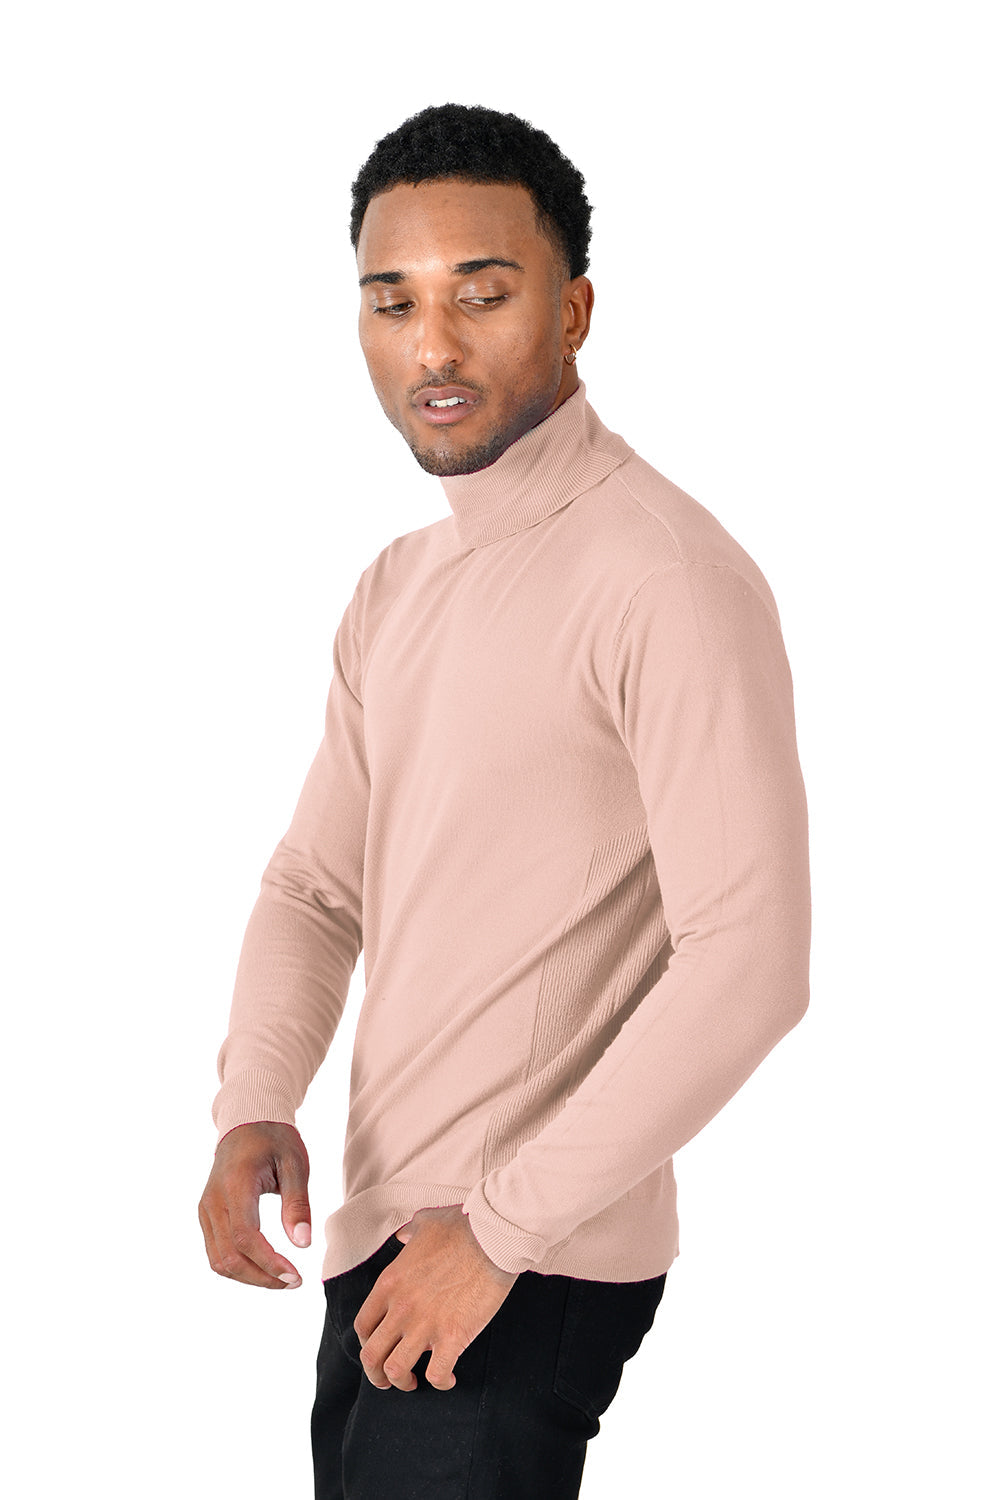 Men's Turtleneck Ribbed Solid Color Basic Sweater LS2100 Stone Peach